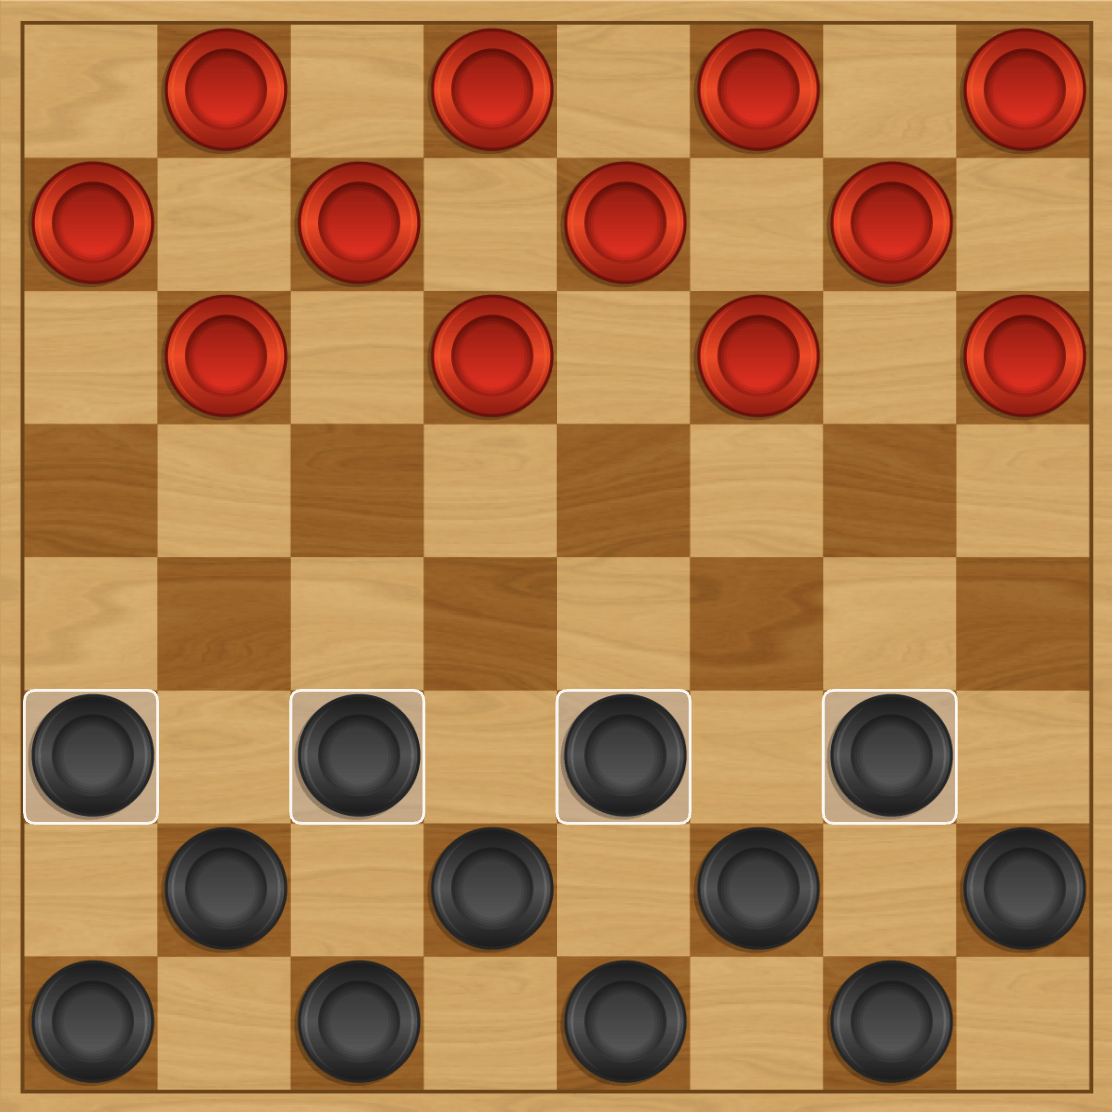 Checkers Online Multiplayer Unblocked